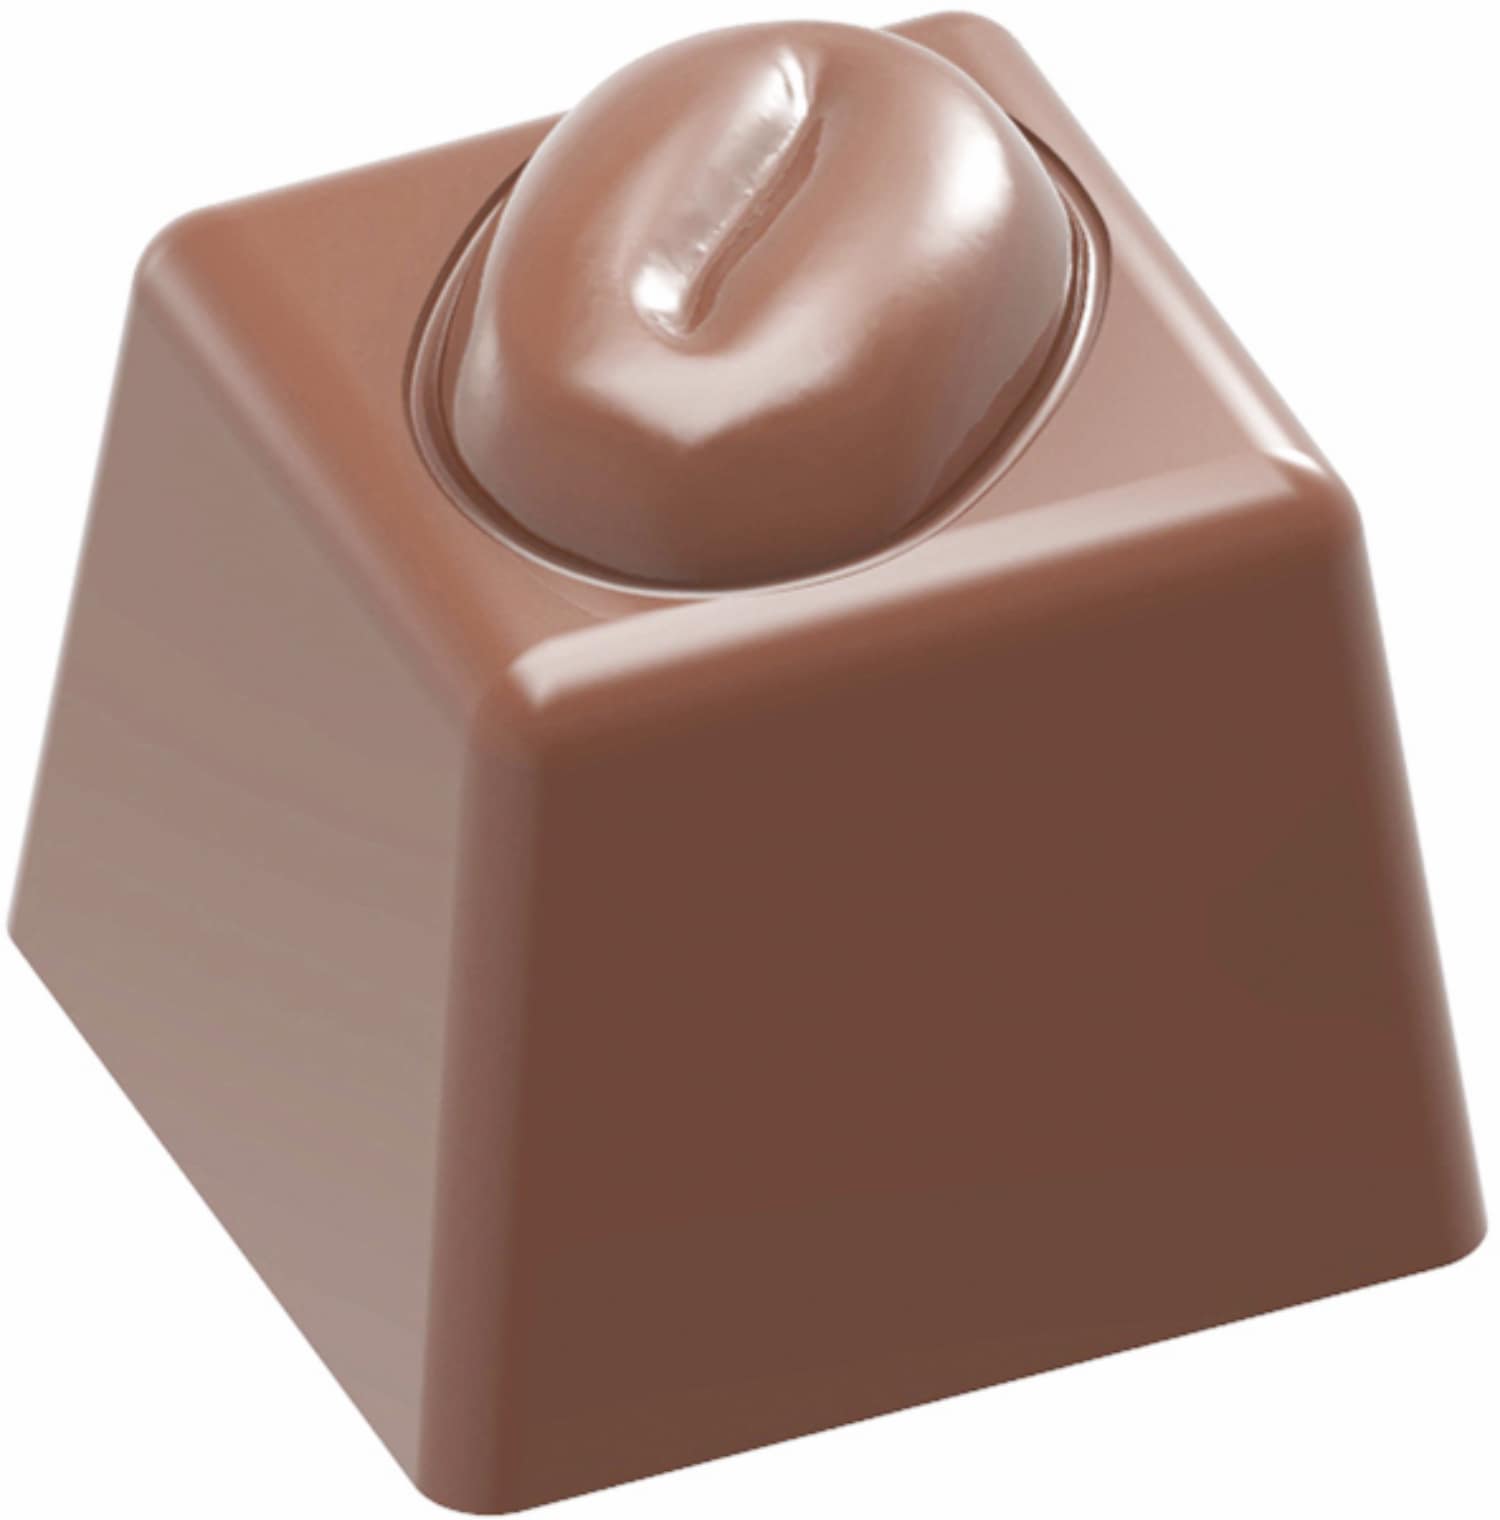 Chocolate mould "Coffee bean" 421880